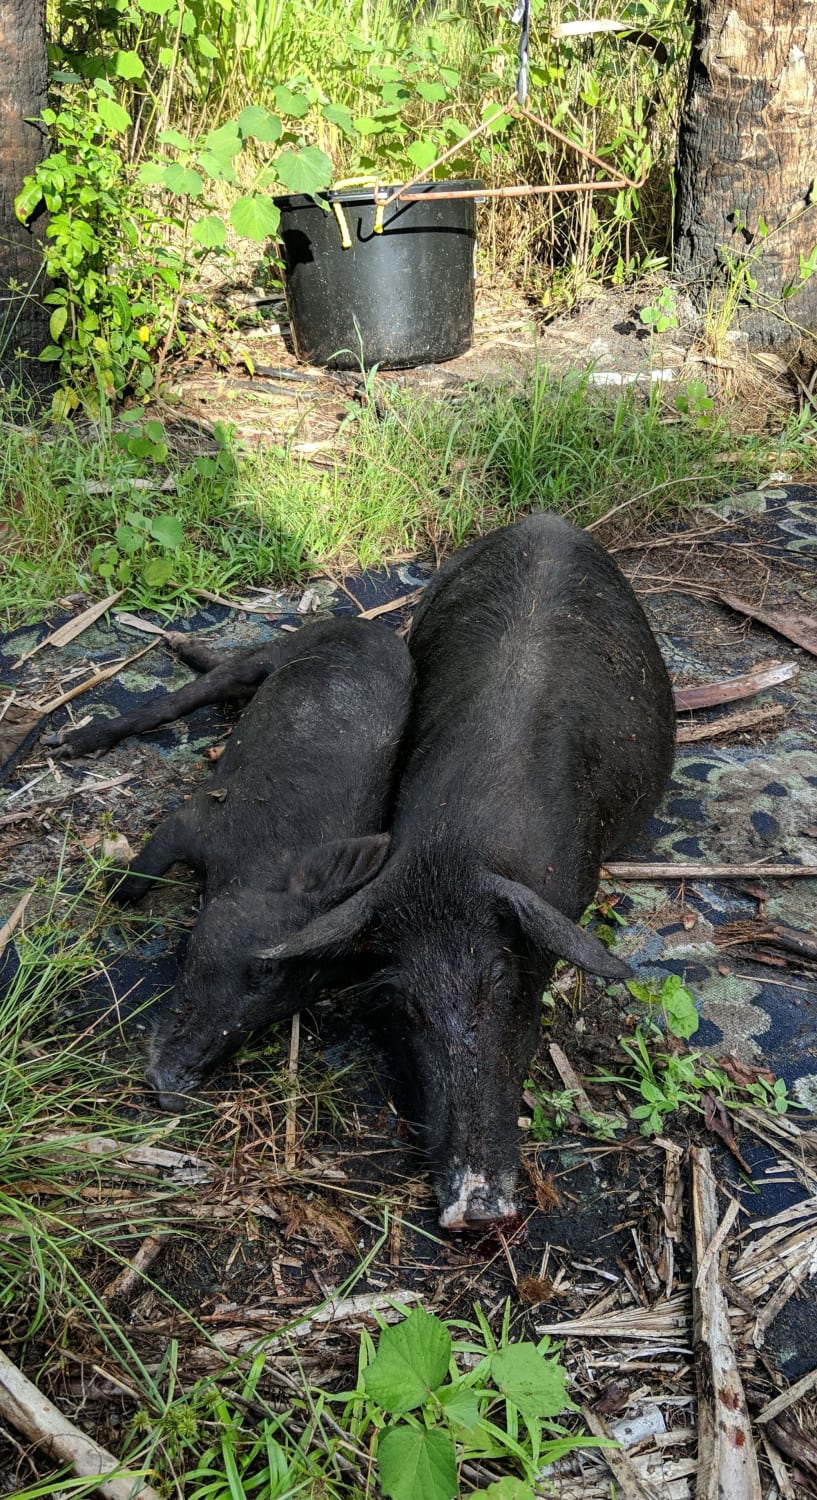 2 down in south florida!